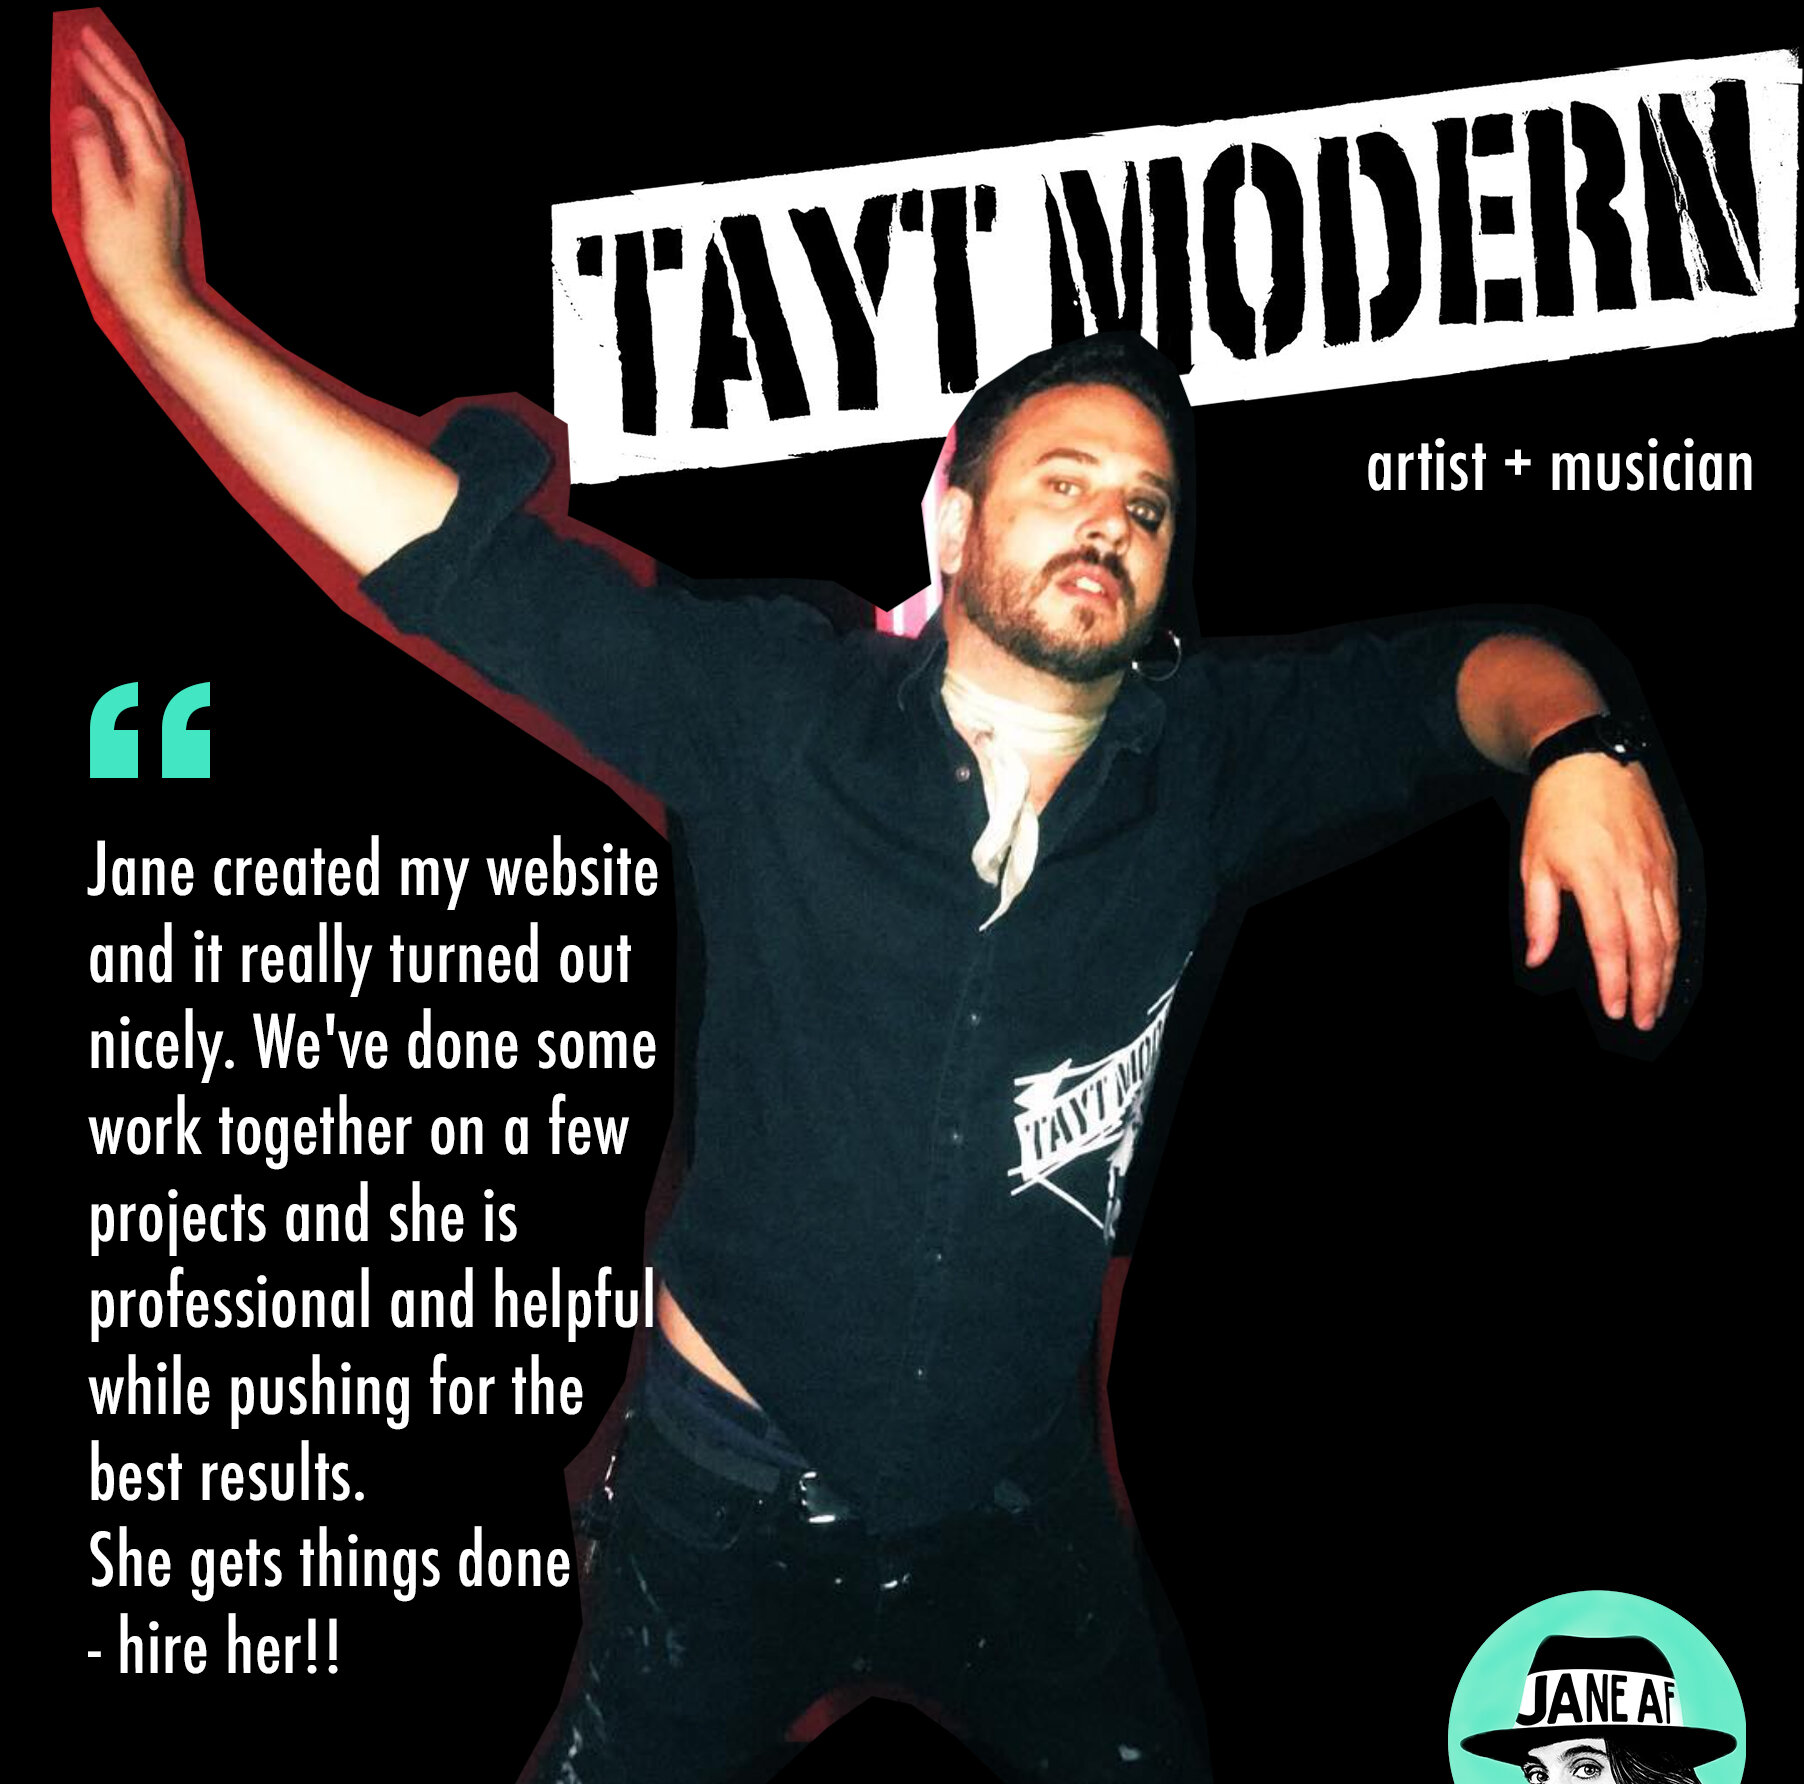 Tayt Modern Artisit and Musician